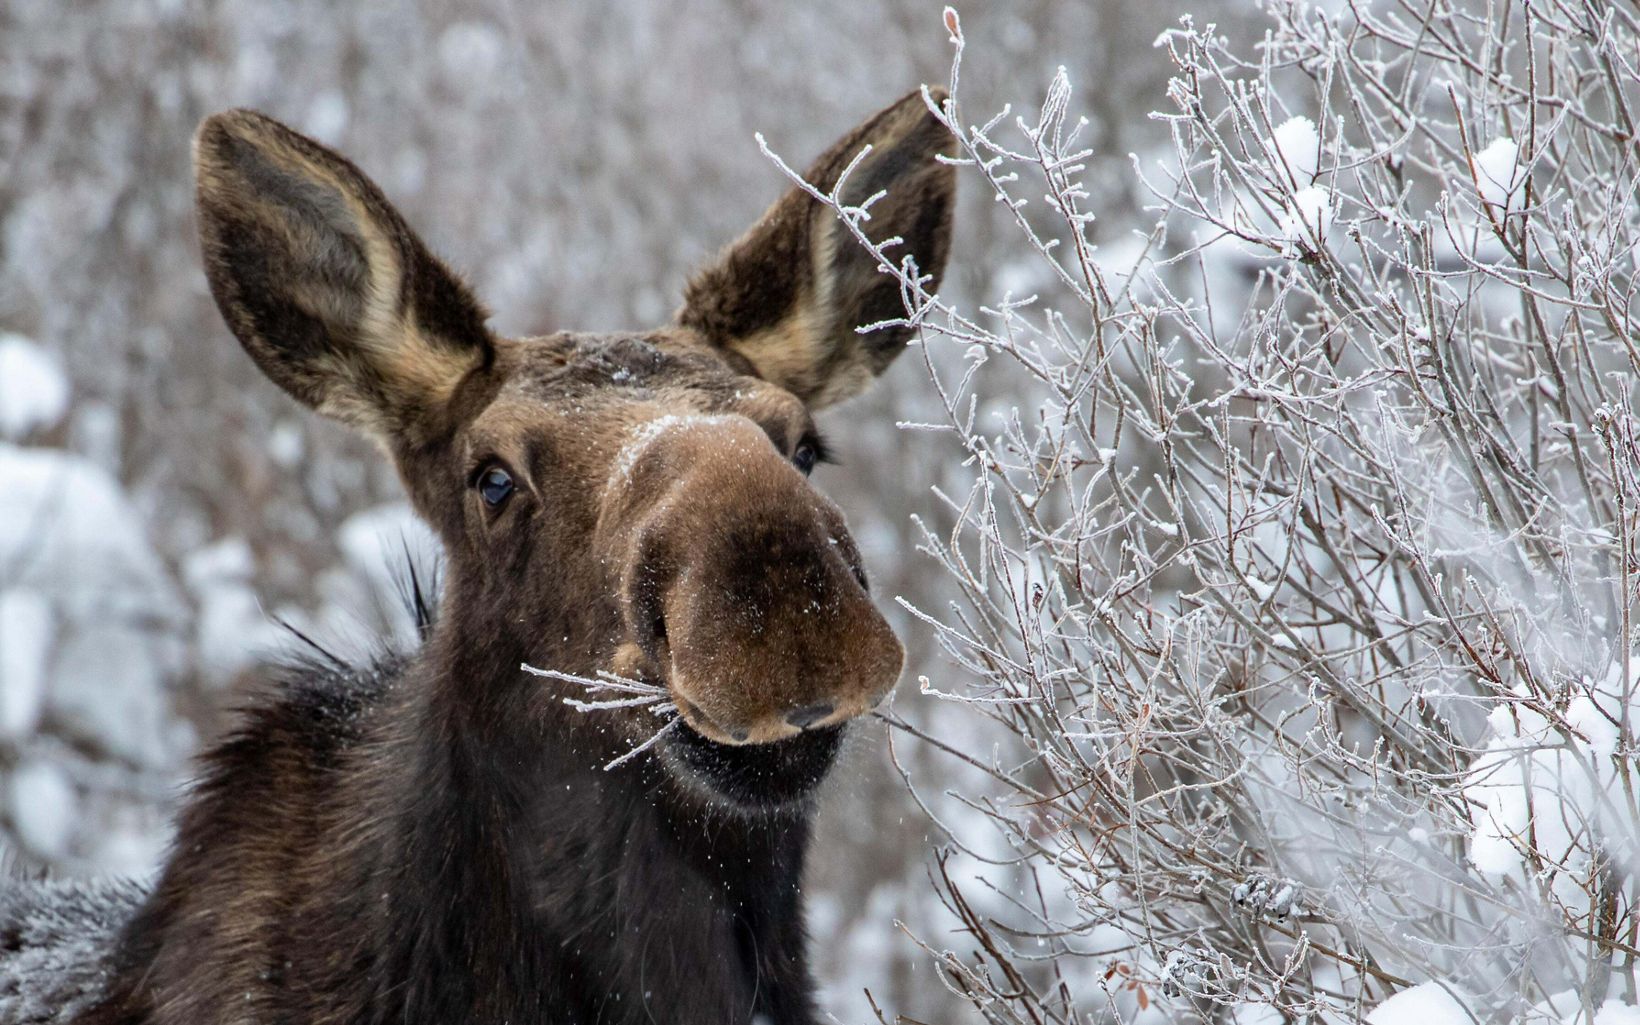 moose munching on a snowy day.